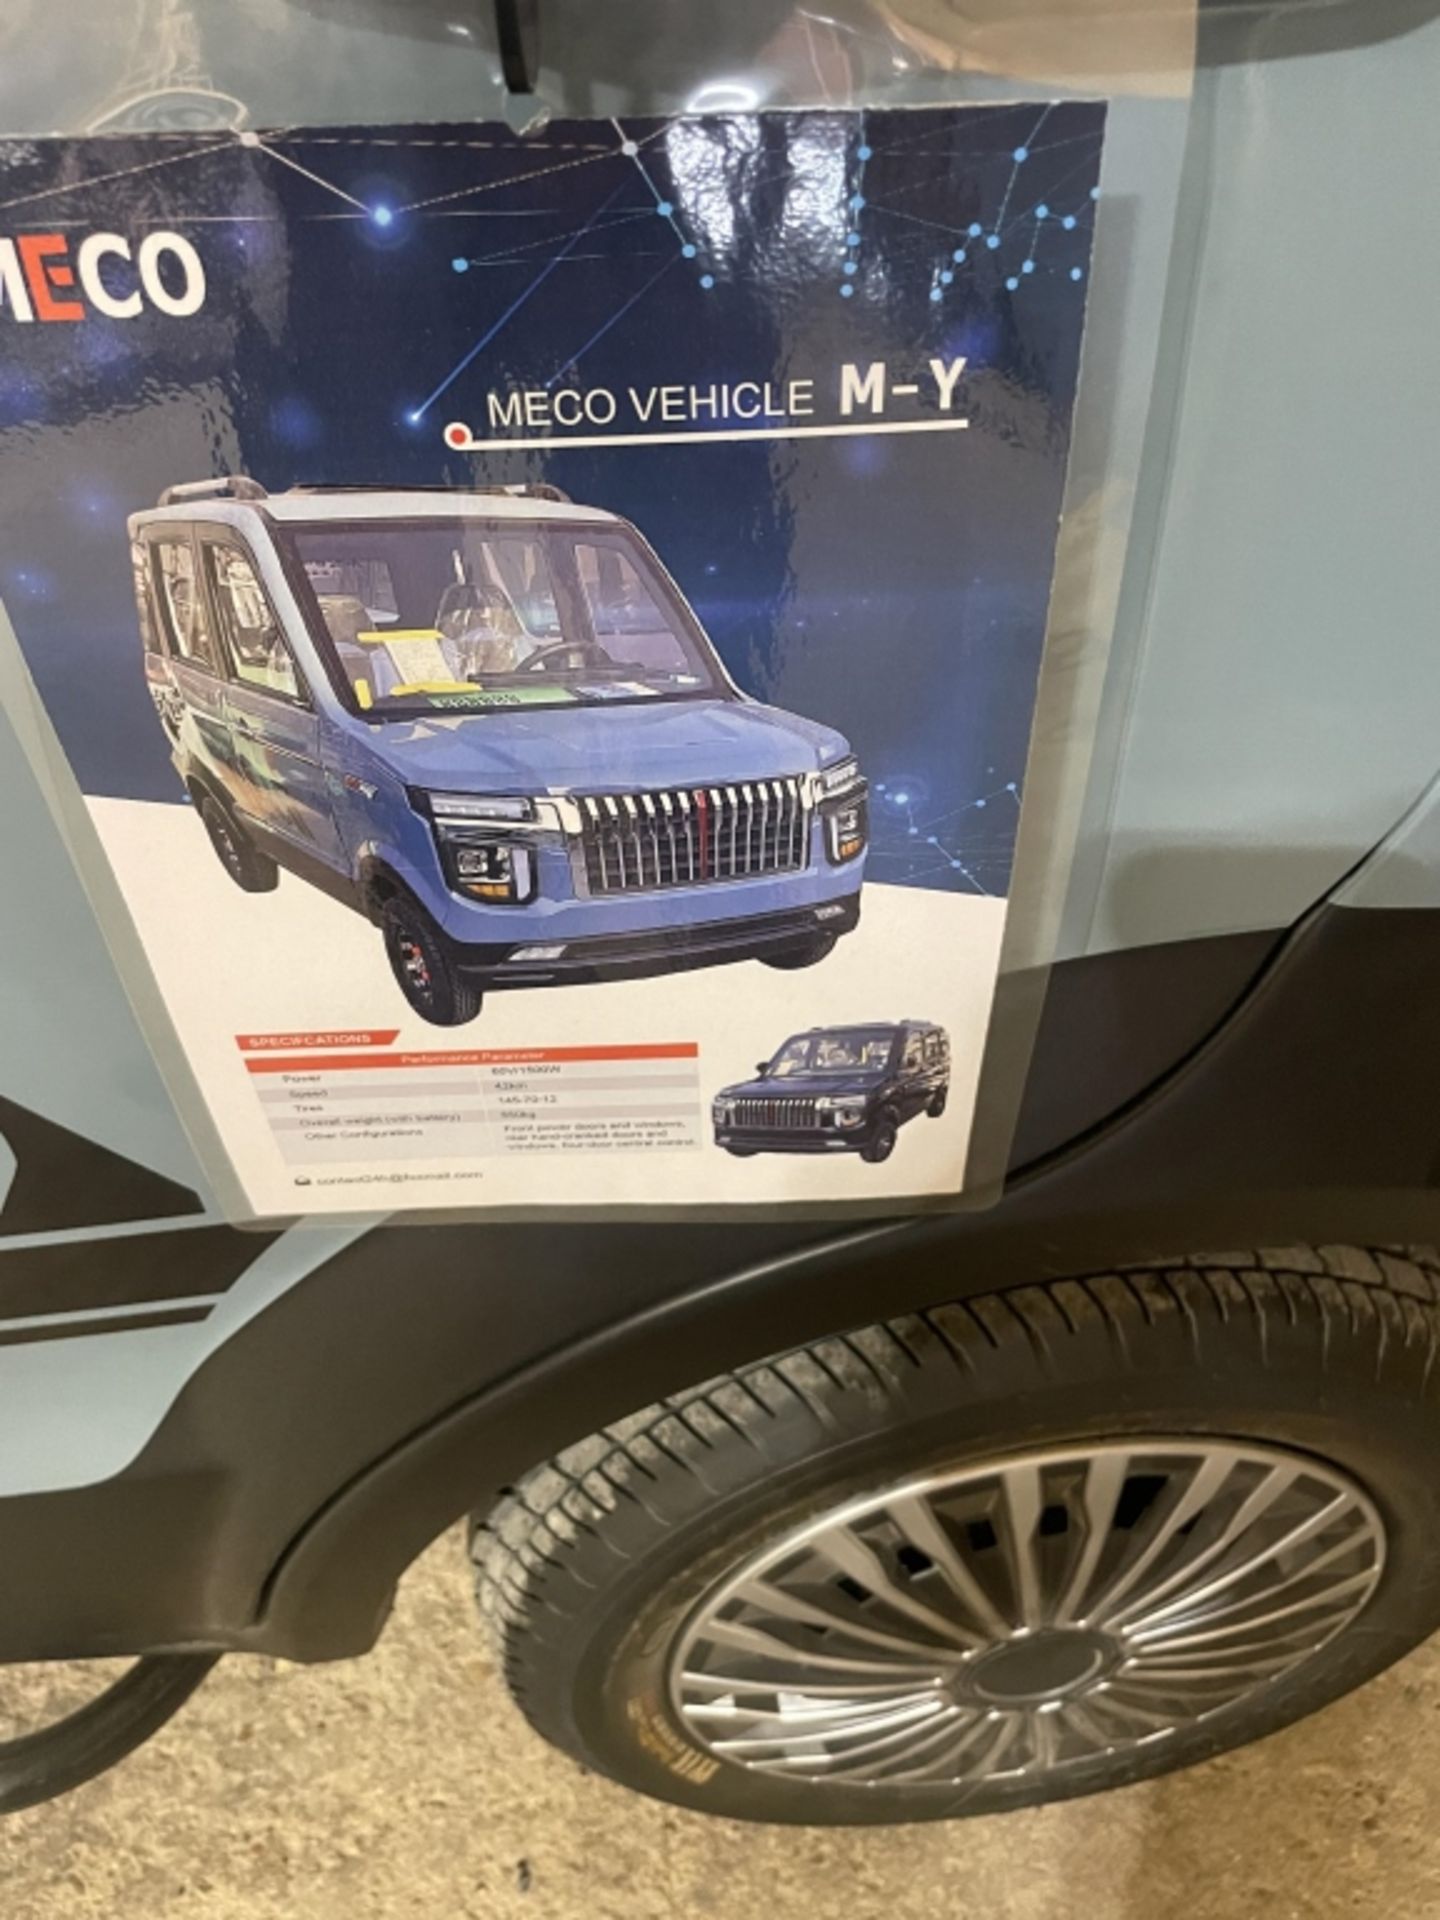 MECO M-Y Electric Vehicle - Image 24 of 25